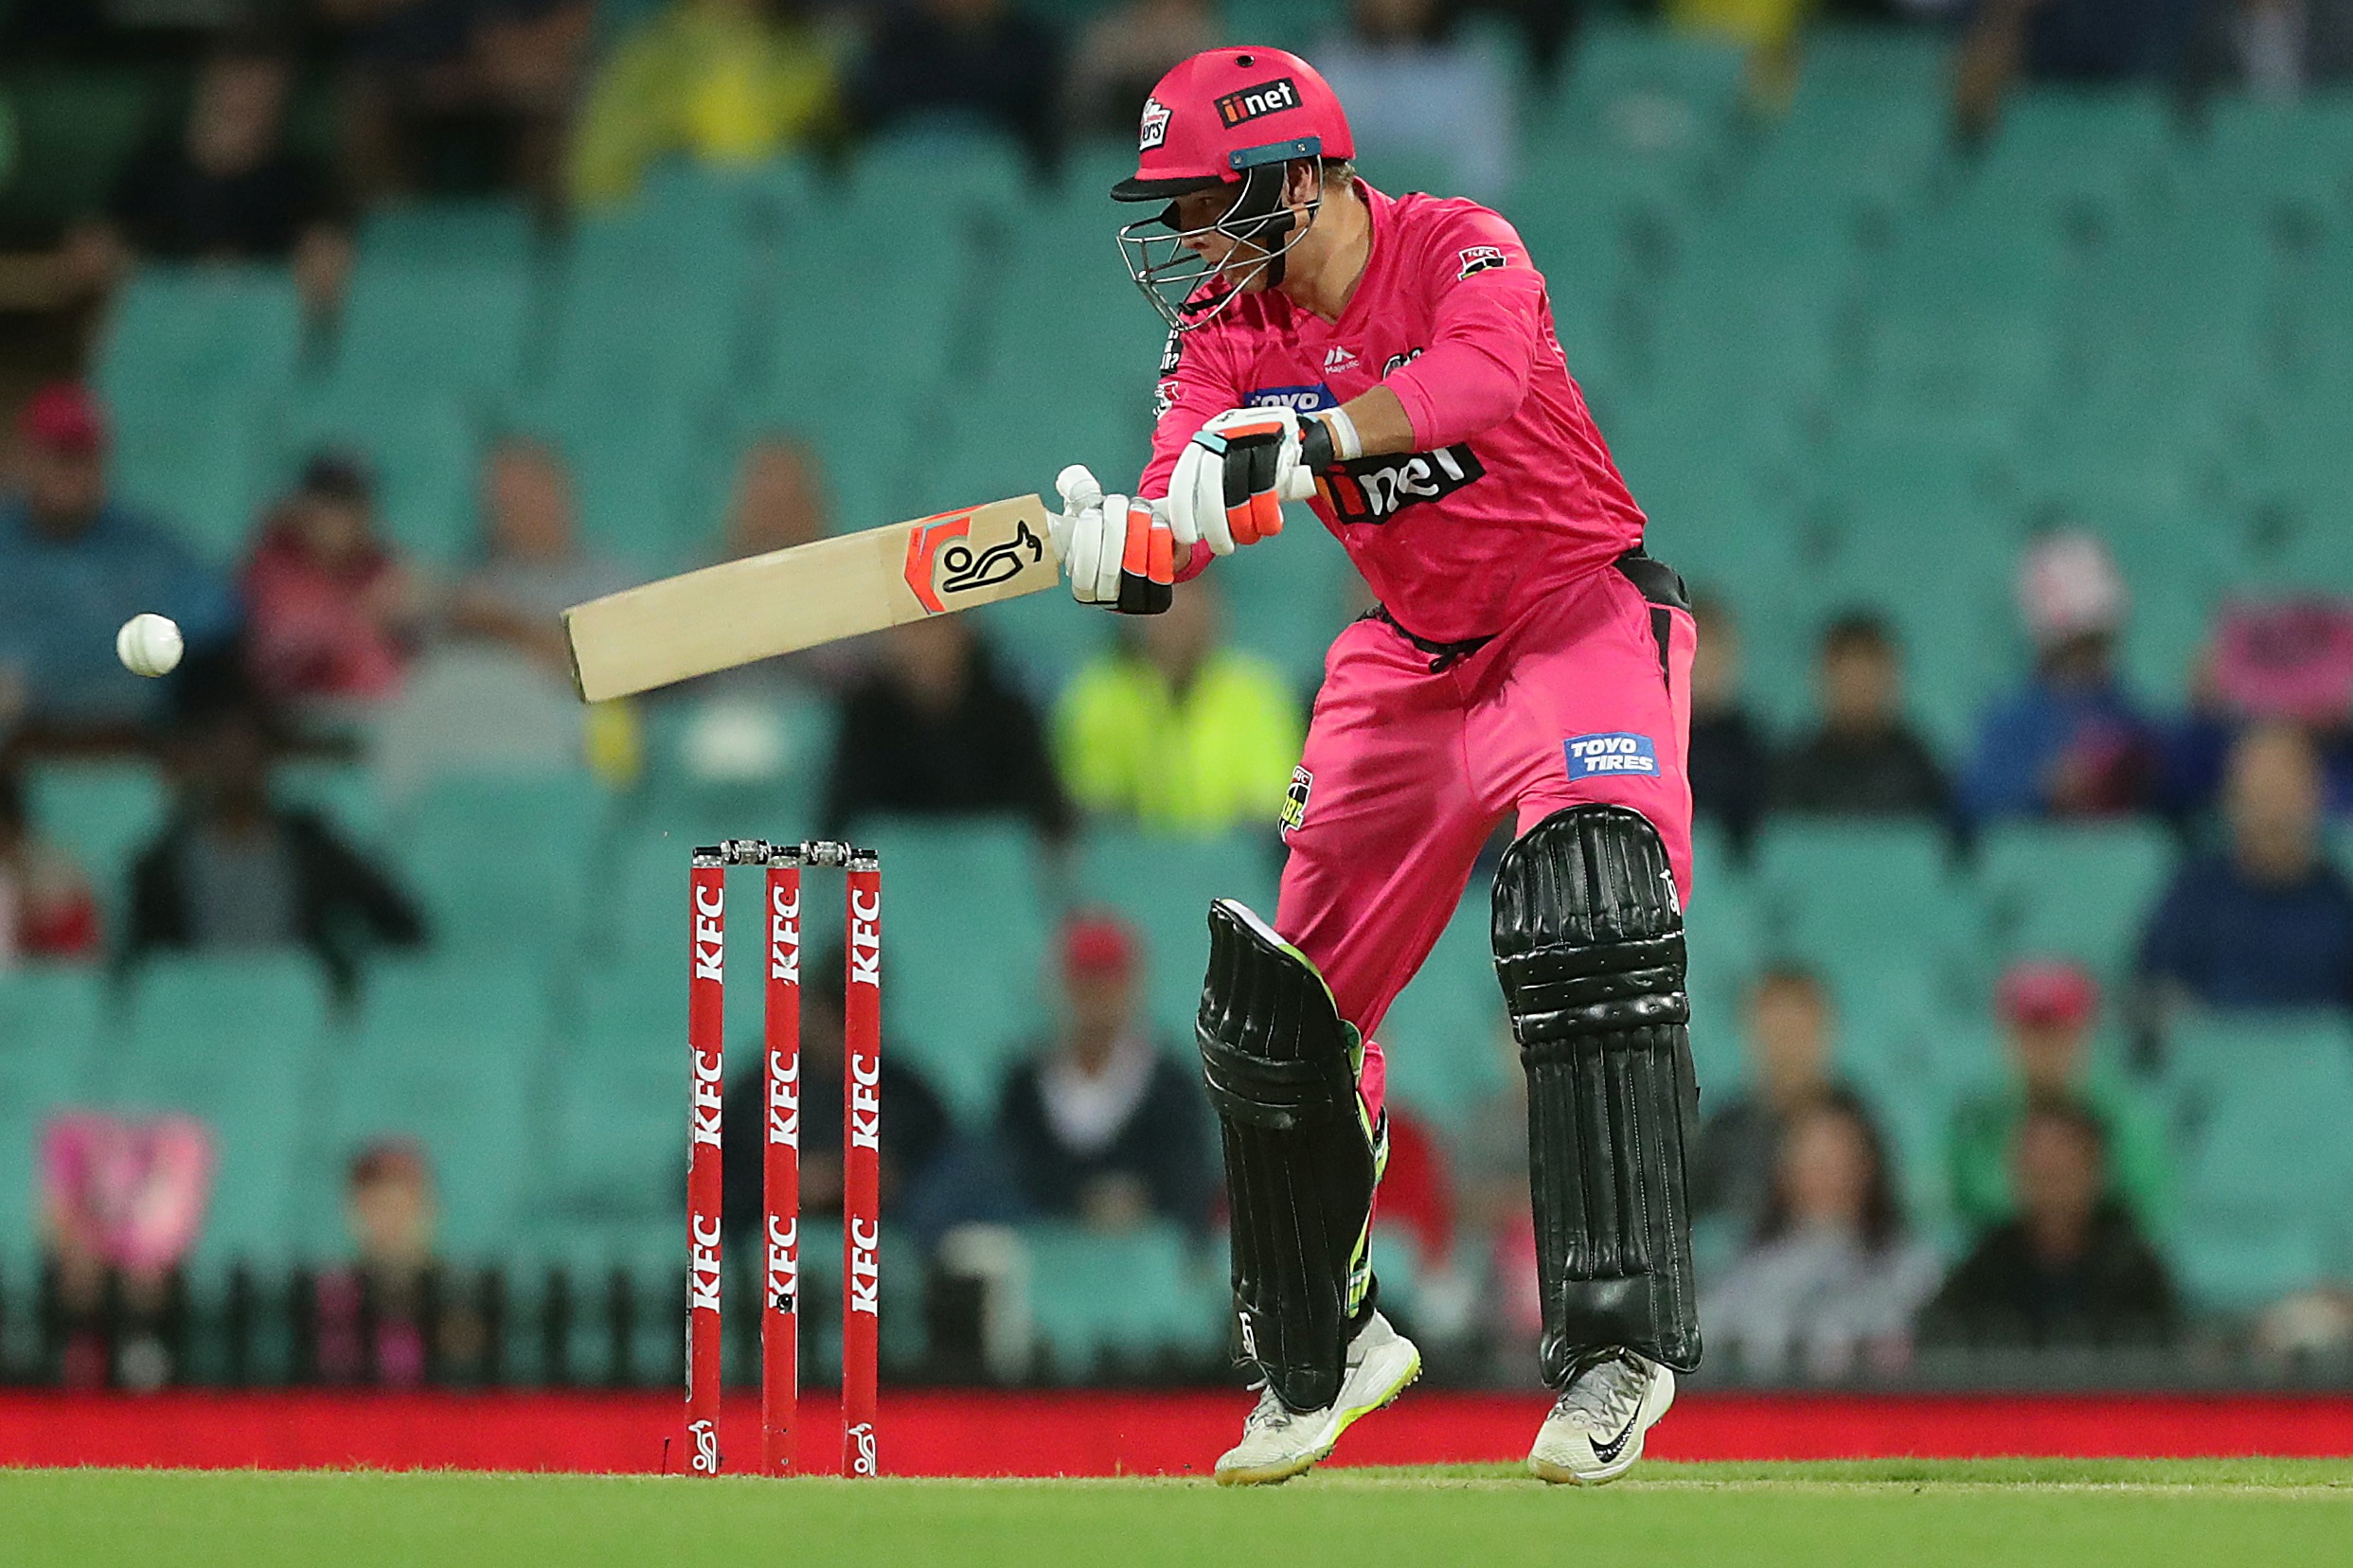 BBL: Sydney Sixers beat Melbourne Stars, win 2nd title